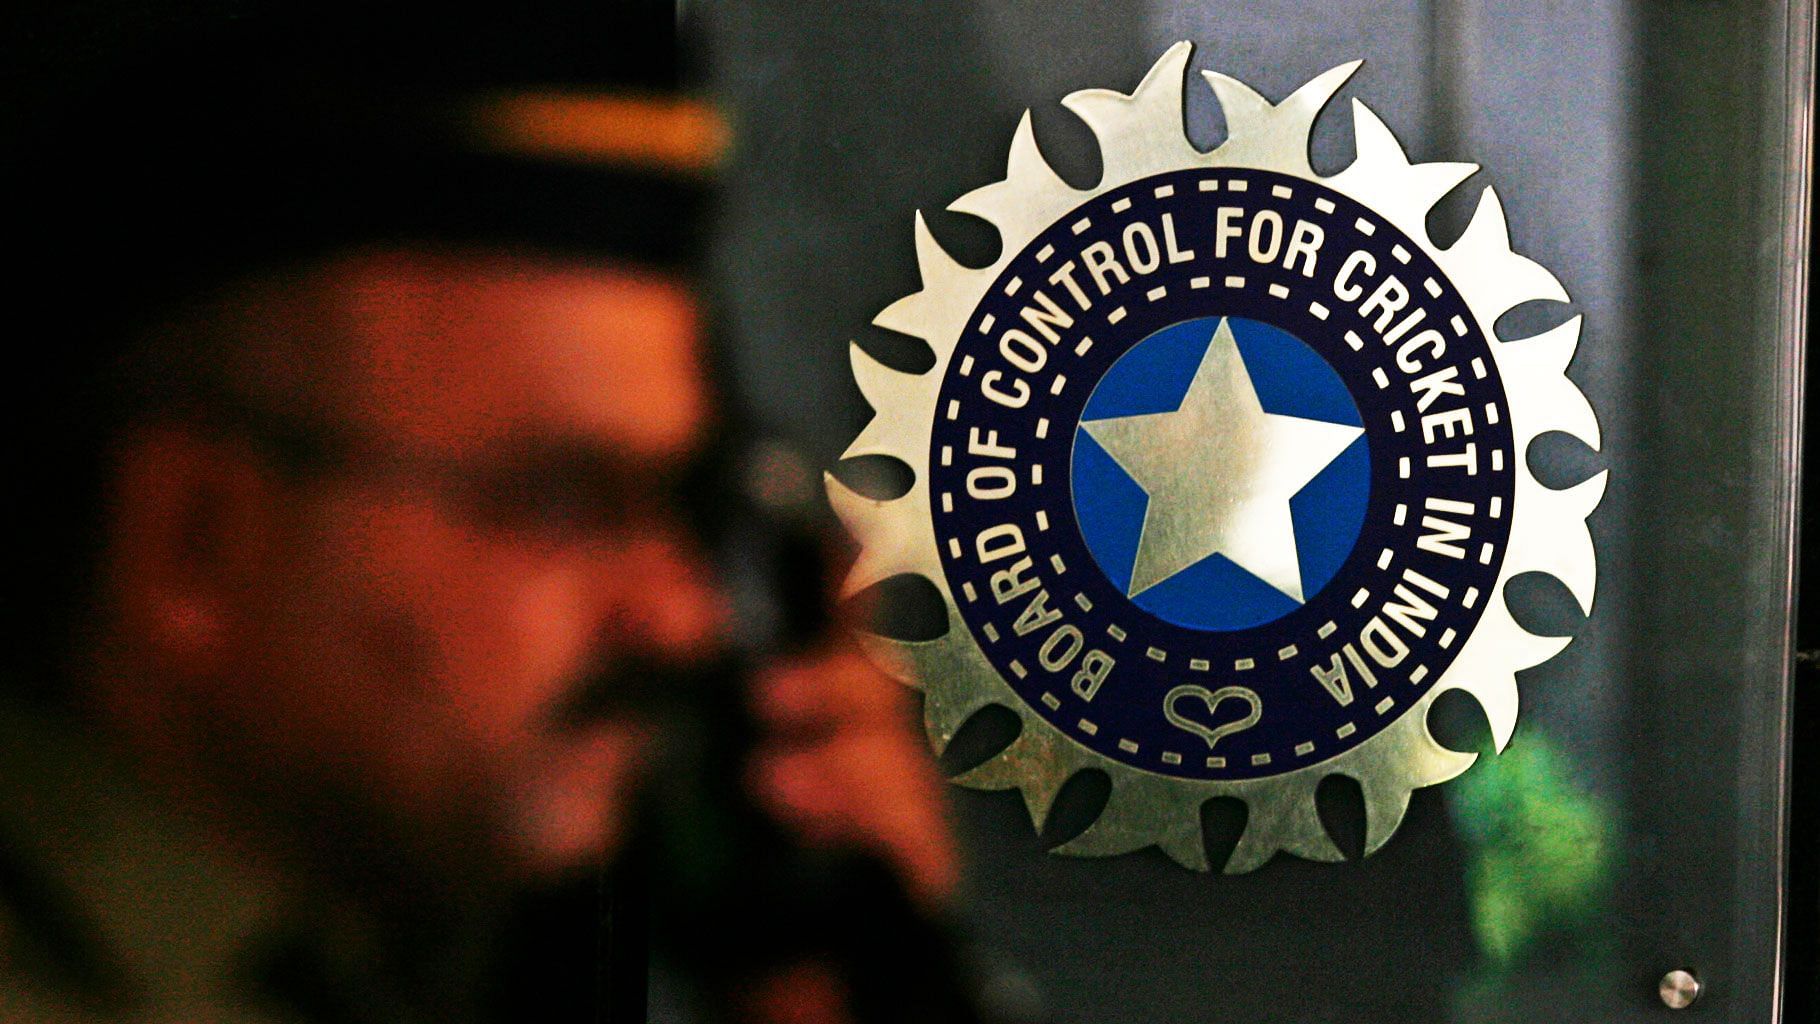 ICC has demanded the BCCI to show proof that they can get a tax debate for the 2021 T20 World Cup.